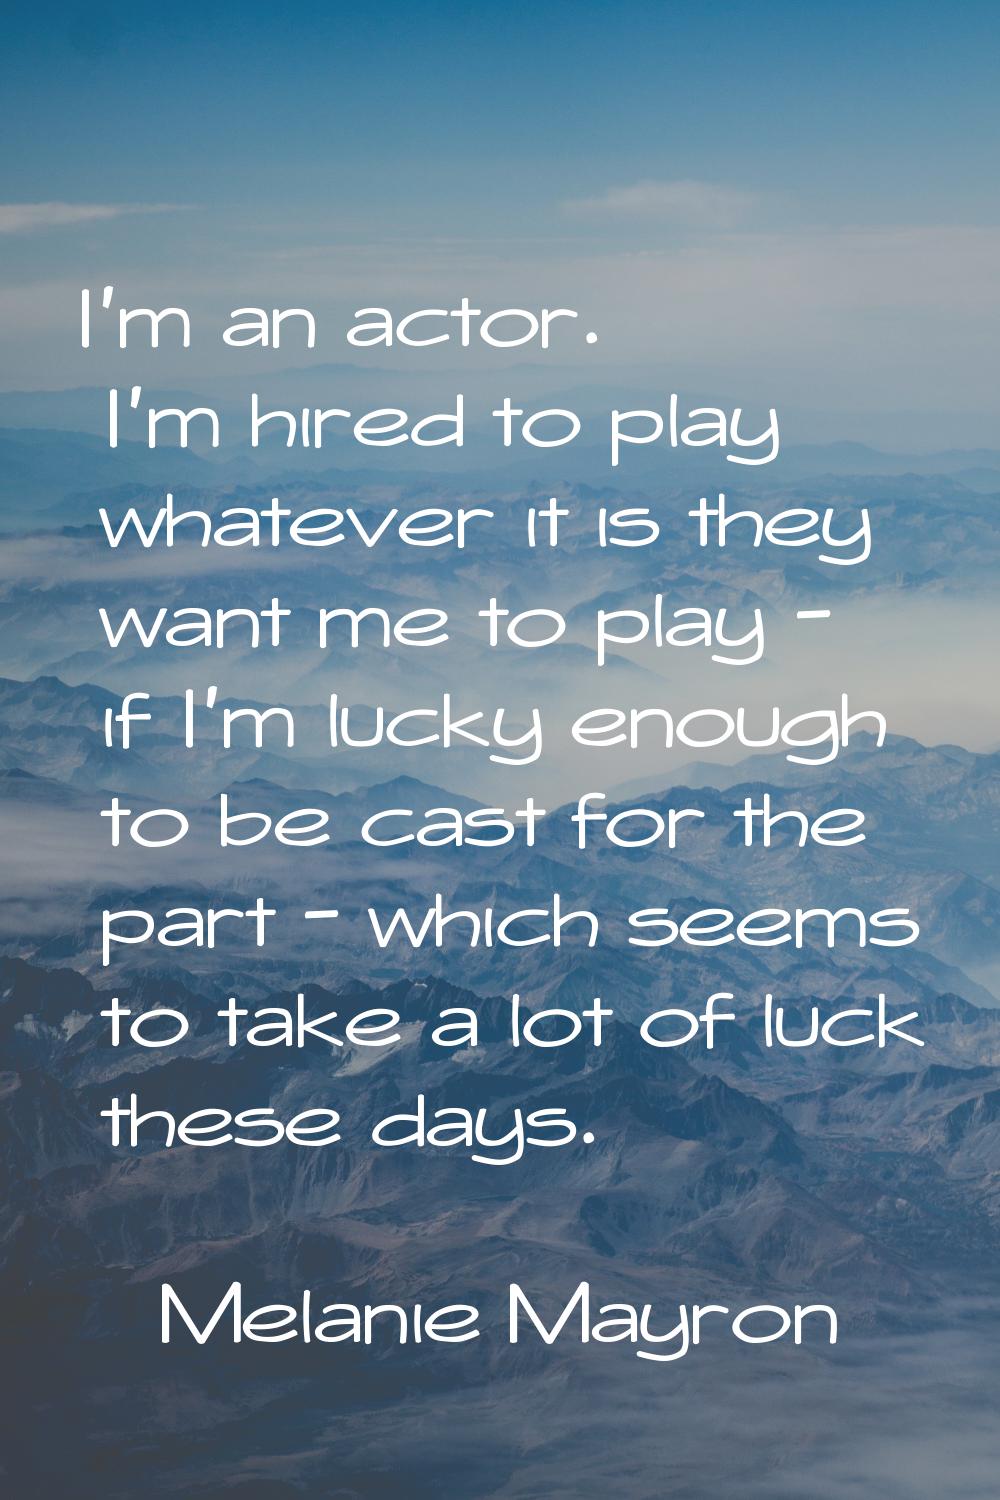 I'm an actor. I'm hired to play whatever it is they want me to play - if I'm lucky enough to be cas